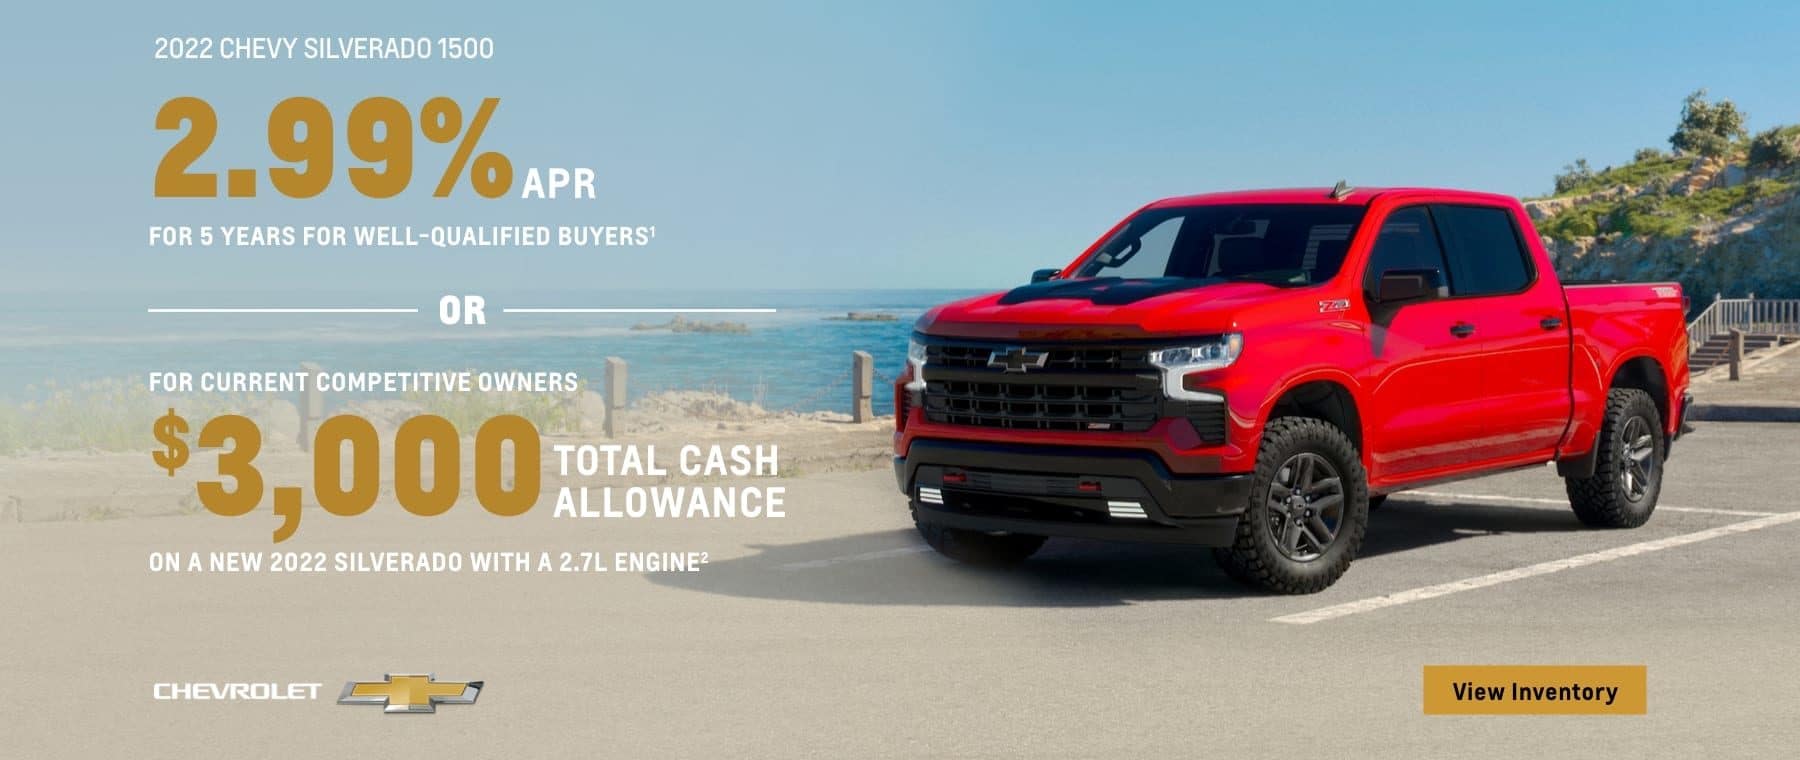 2022 Chevy Silverado 1500. 2.99% APR for 5 years for well-qualified buyers. Or, for current competitive owners $3,000 total cash allowance on a new 2022 Silverado with a 2.7L engine.